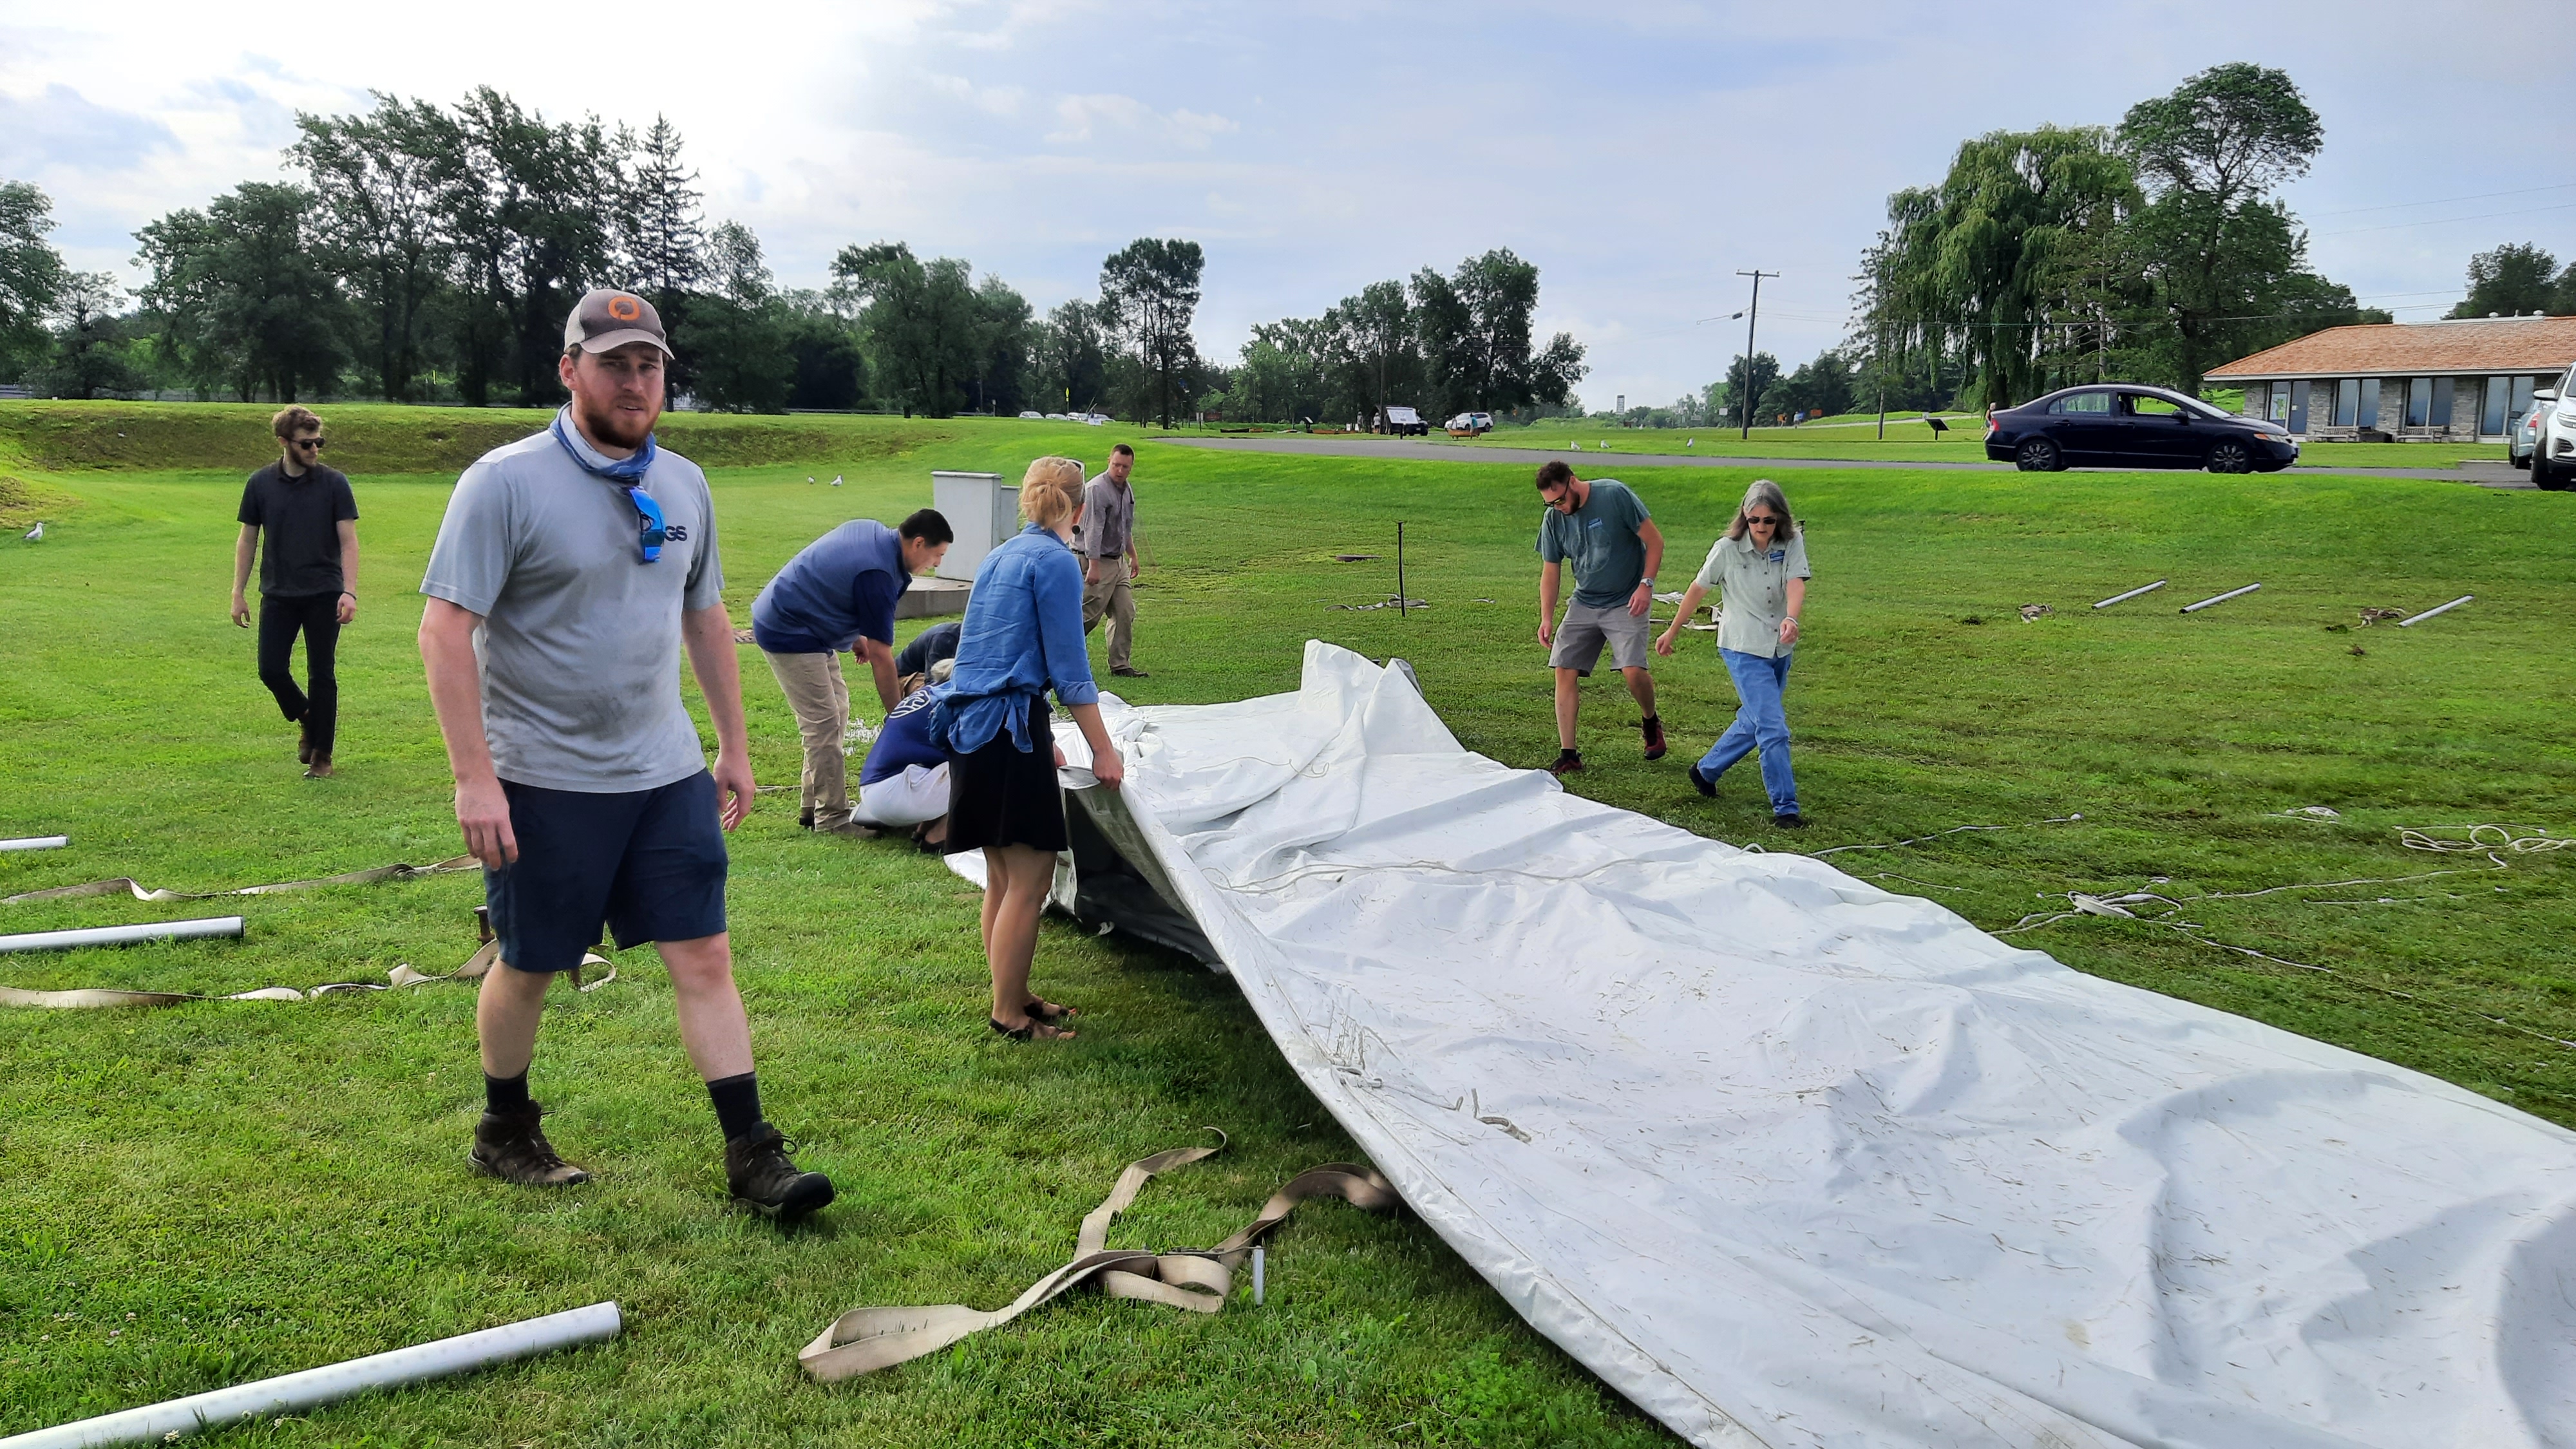 Adirondack Council staff, along with boyfriends, girlfriends, fiances, and spouses work on erecting the tent that fell over